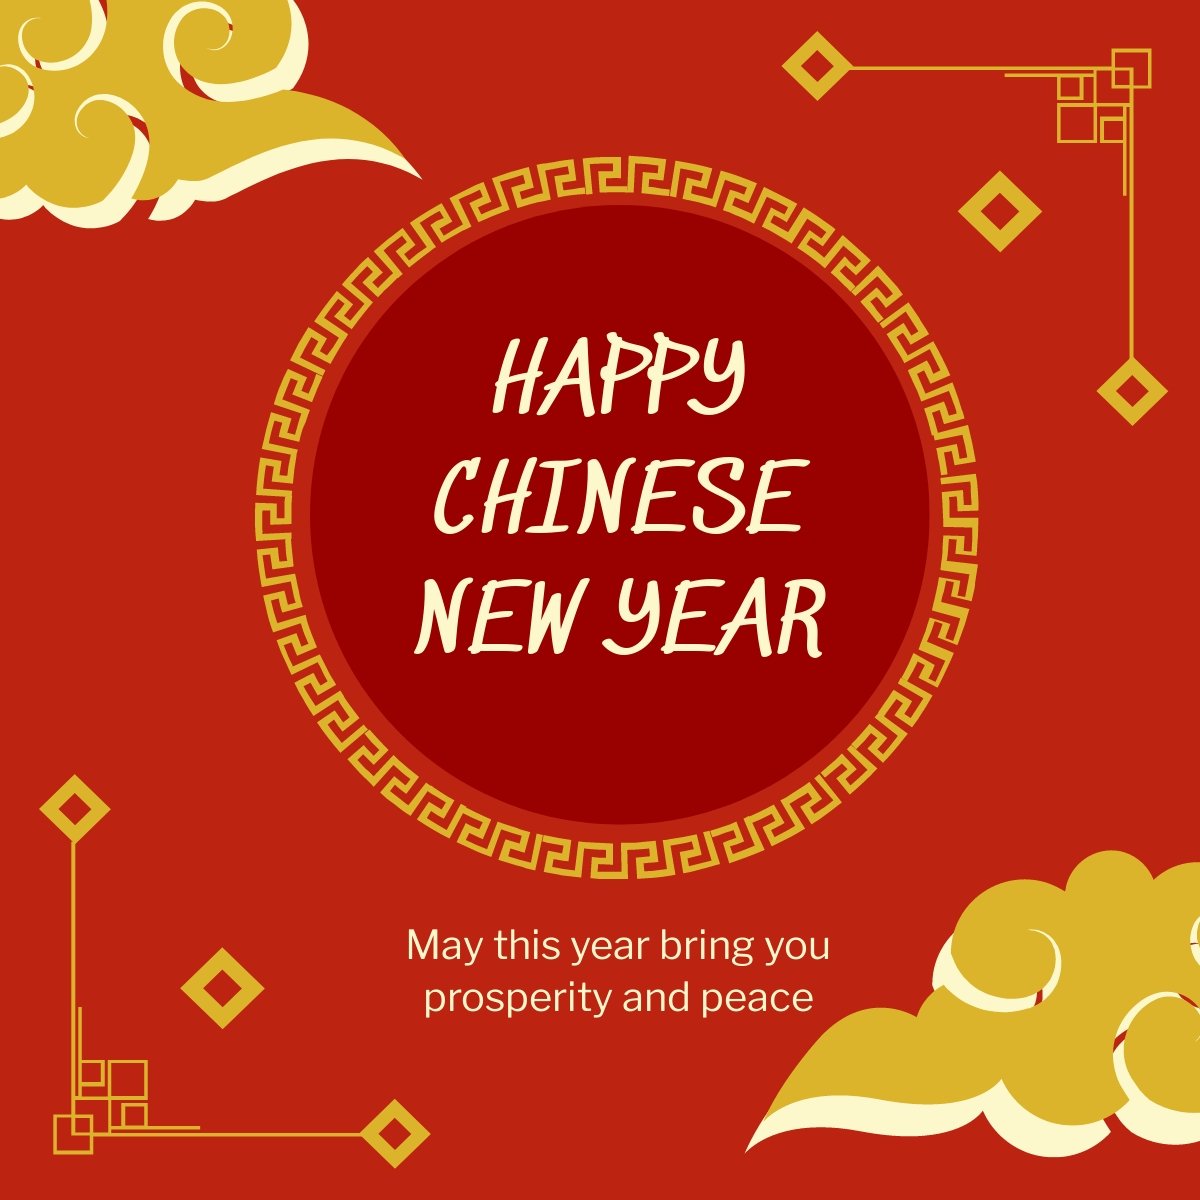 Vintage Chinese New Year Linkedin Post